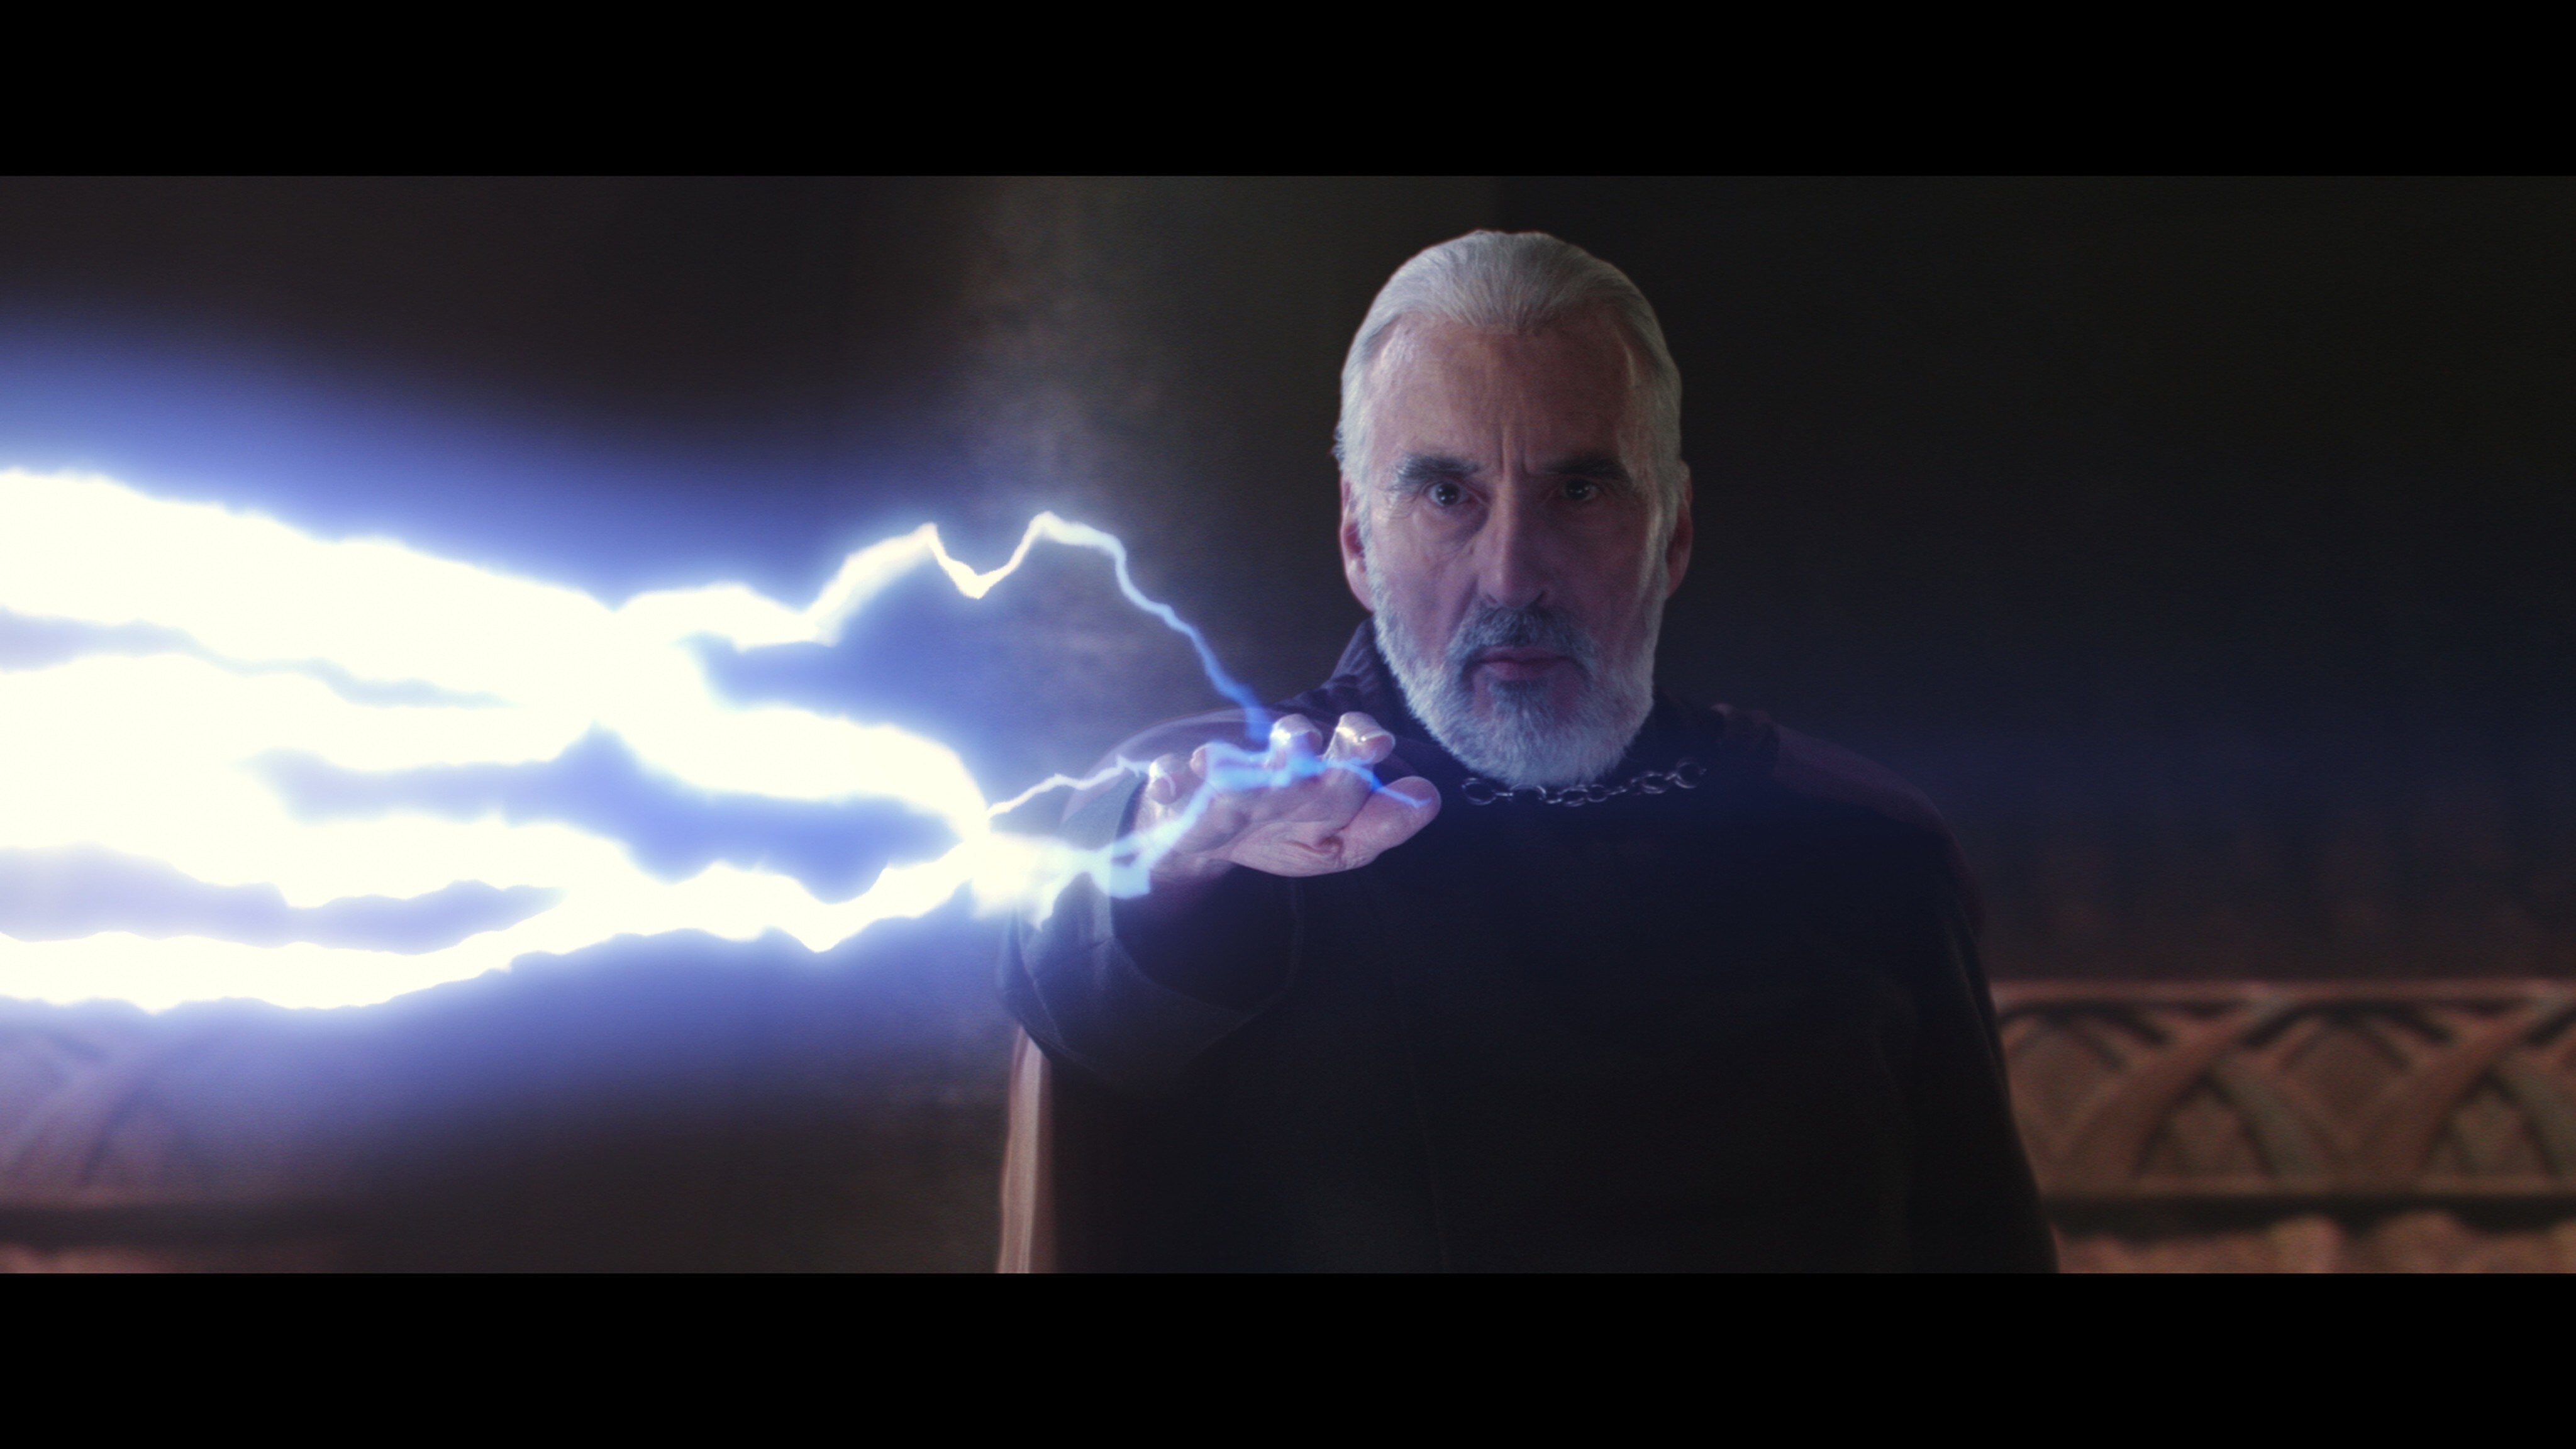 Count Dooku during his climactic battle with Yoda